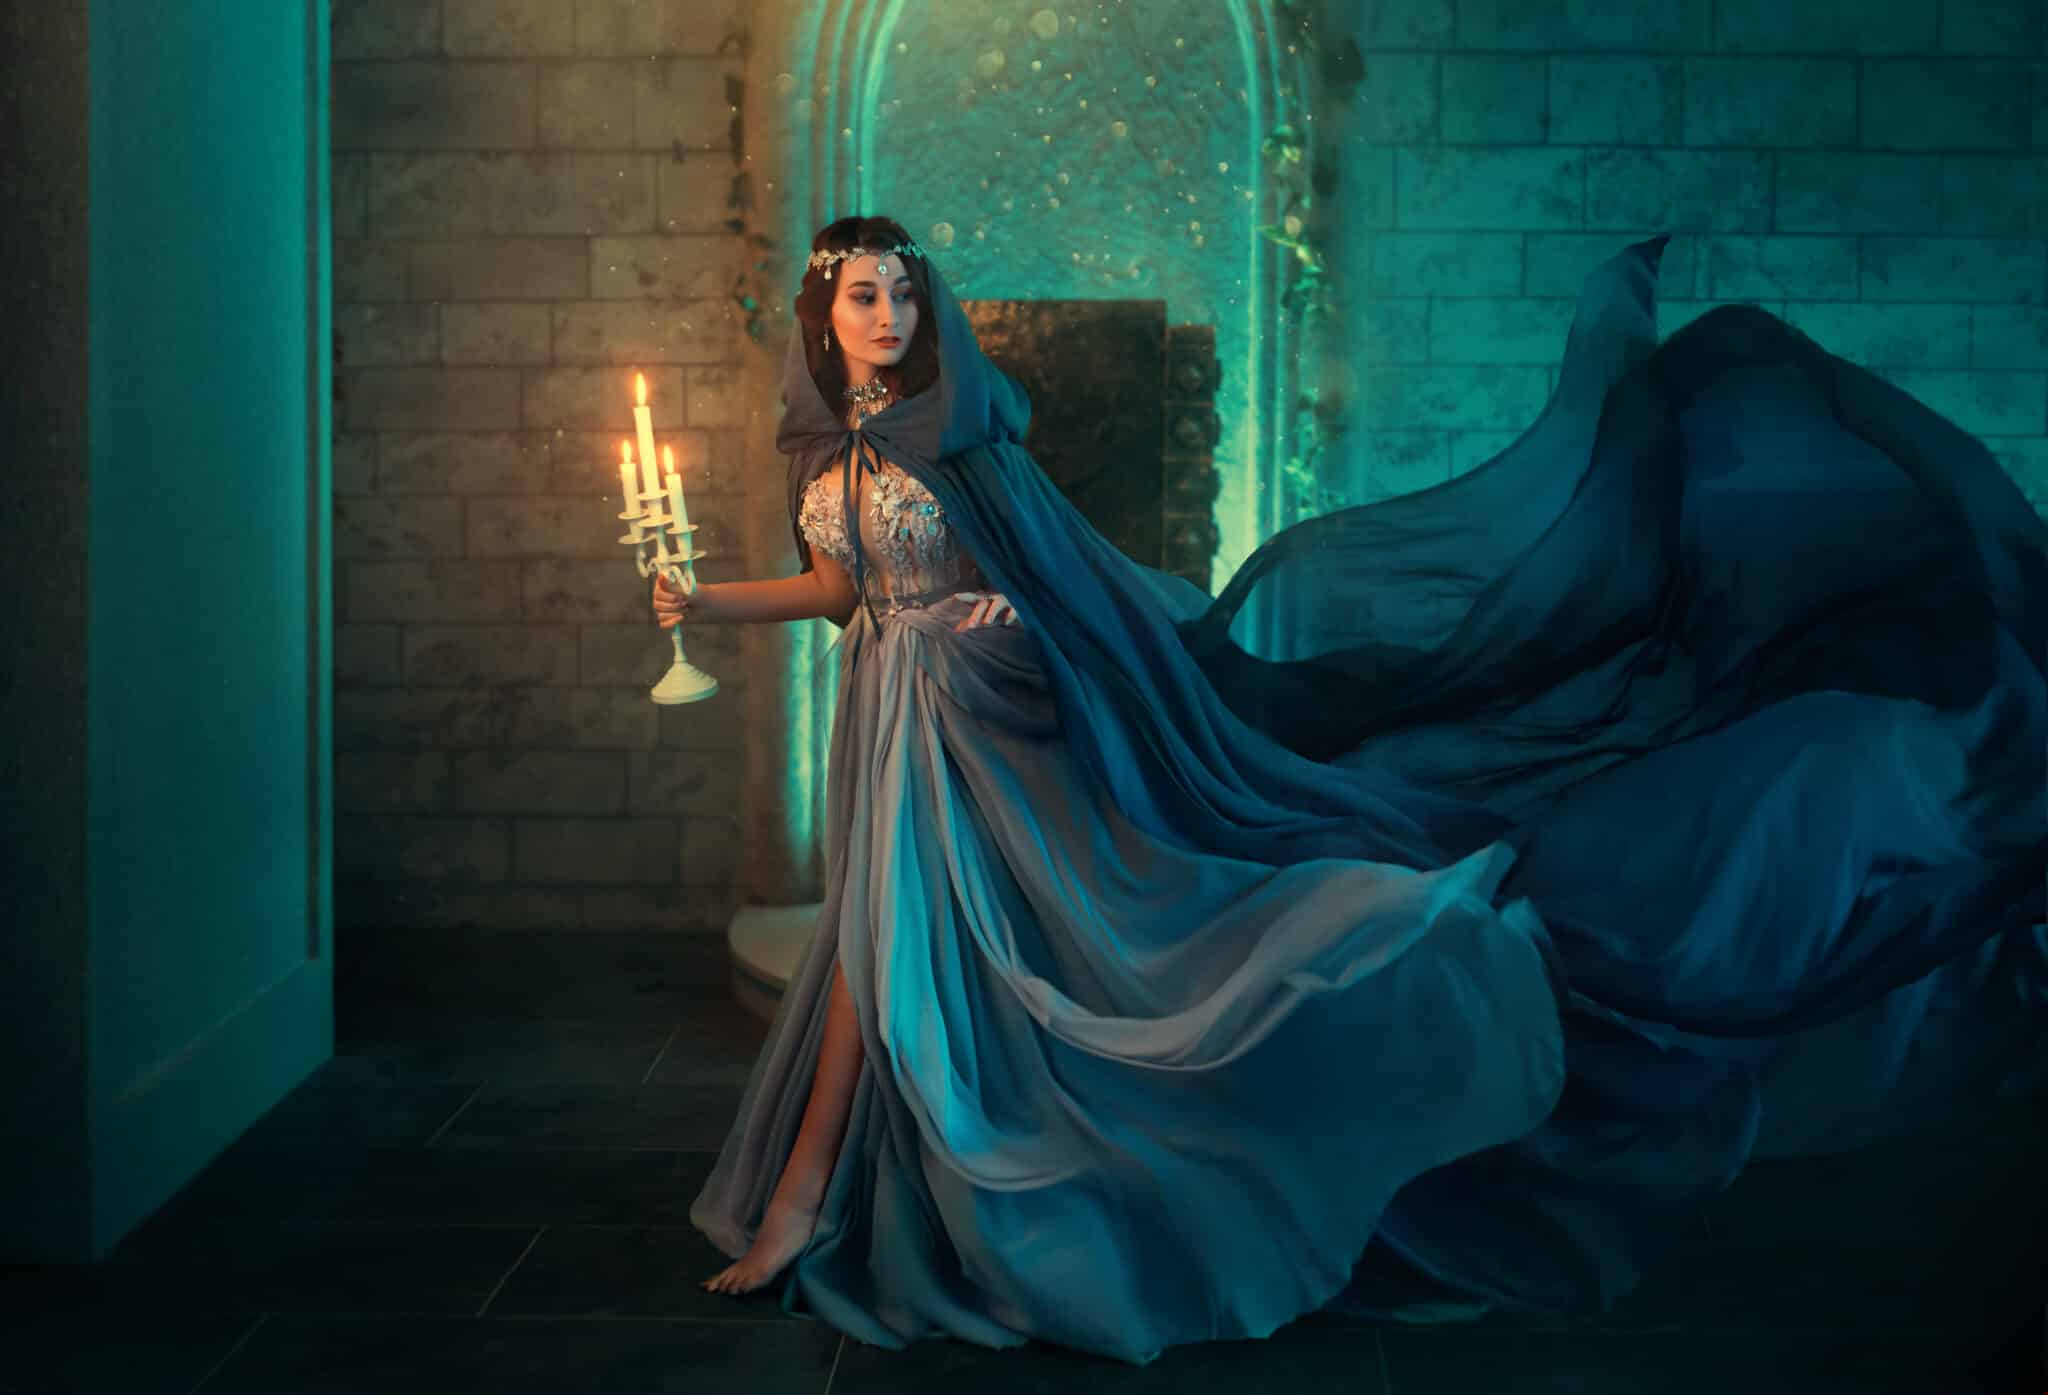 Luxury lady Queen medieval royal dress run escapes from Gothic night castle. 